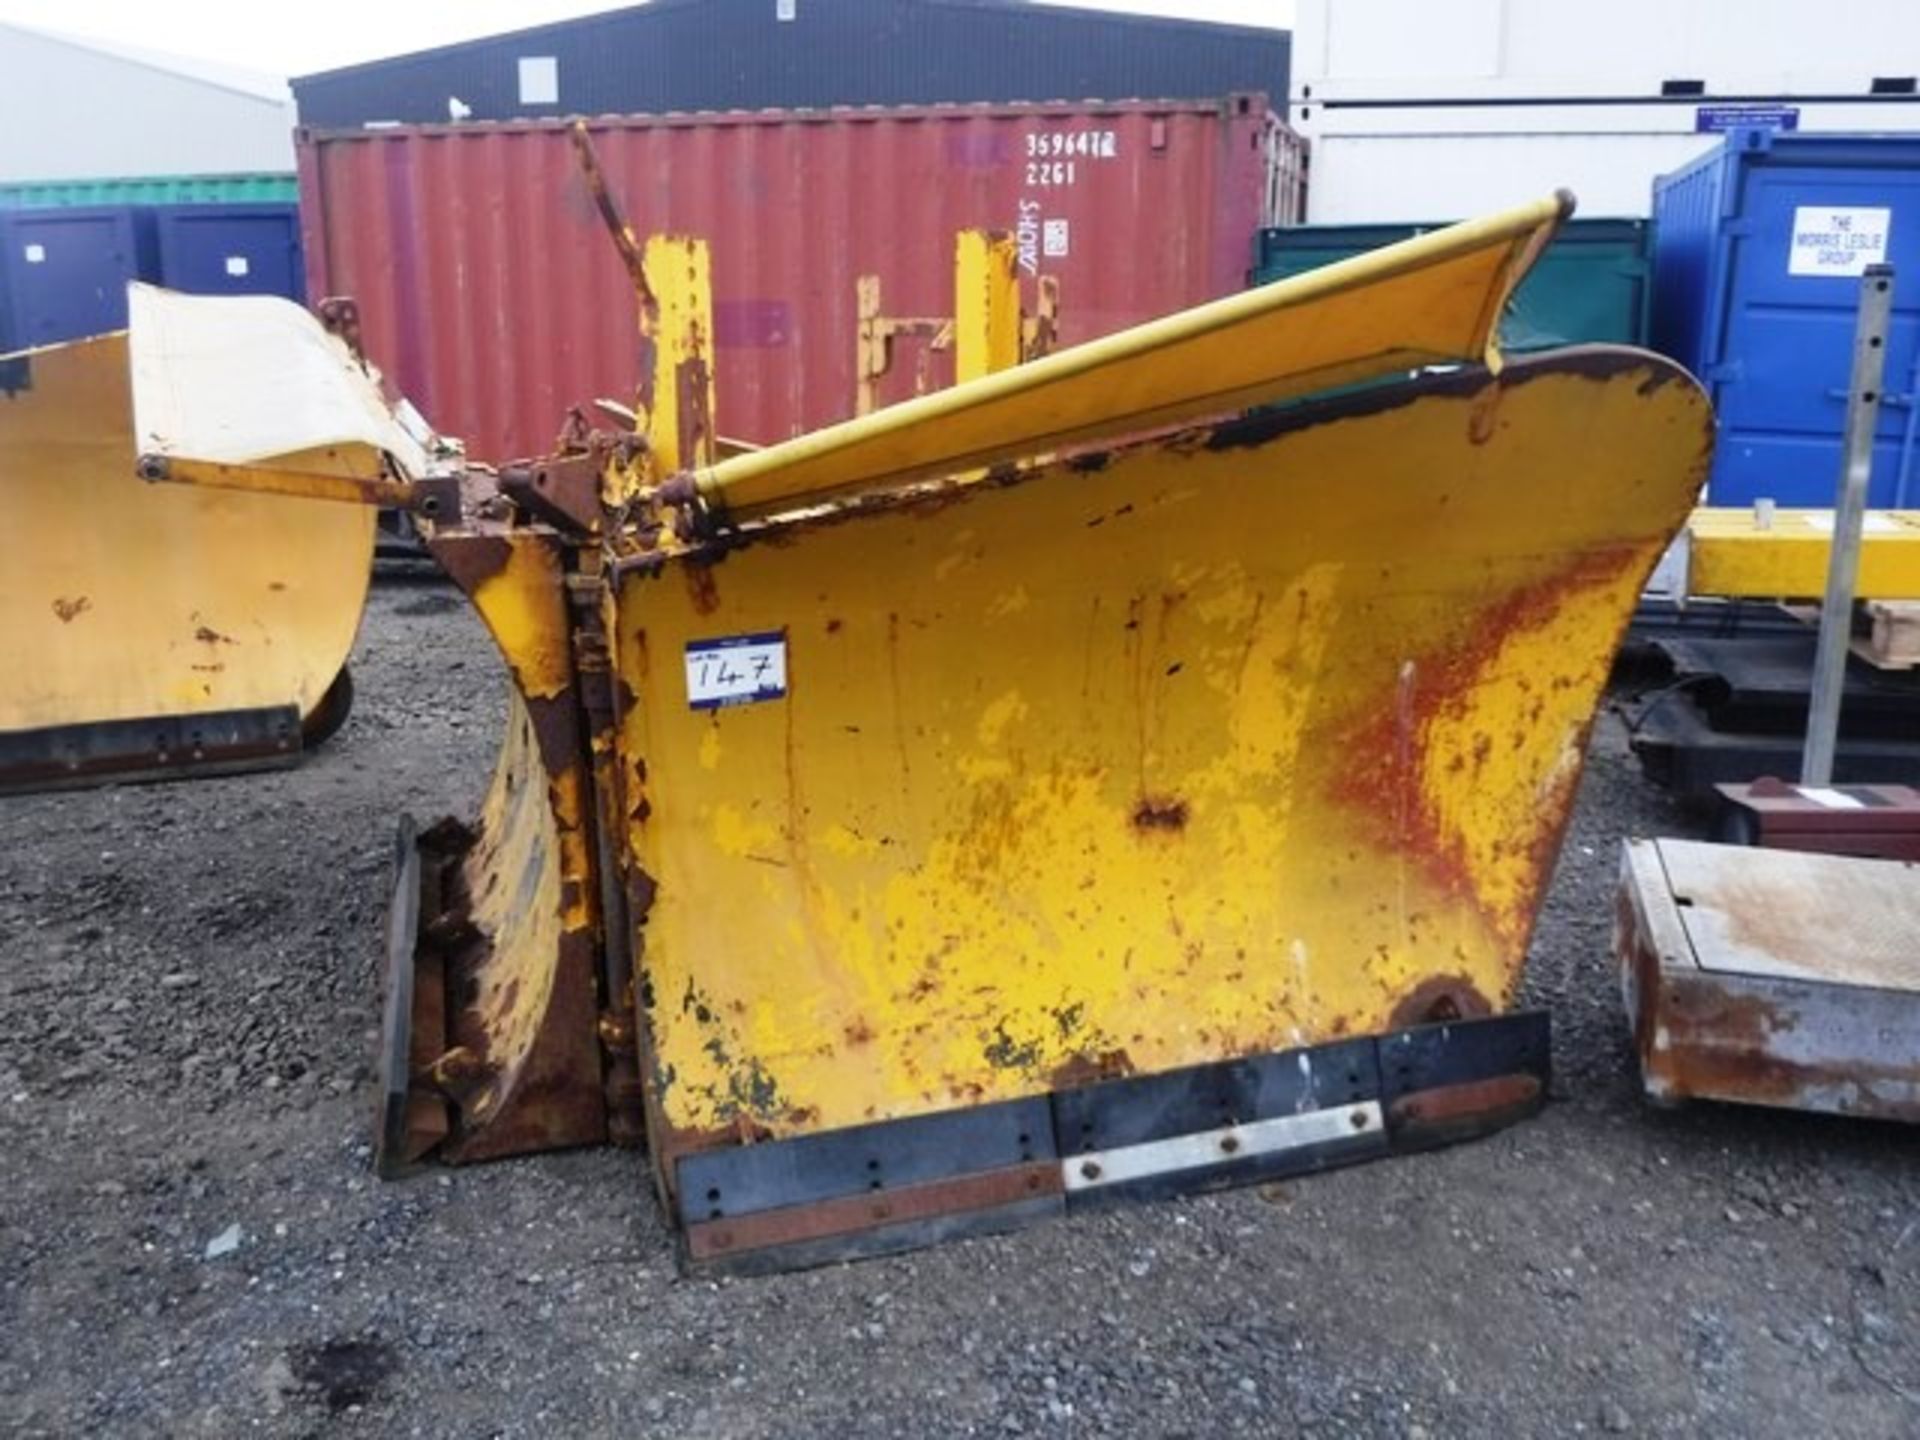 LARGE SNOW PLOUGH, MAKE UNKNOWN, BOTH BLADES TOGETHER 13' 8" W 4' 10" H***DIRECT FROM COUNCIL***